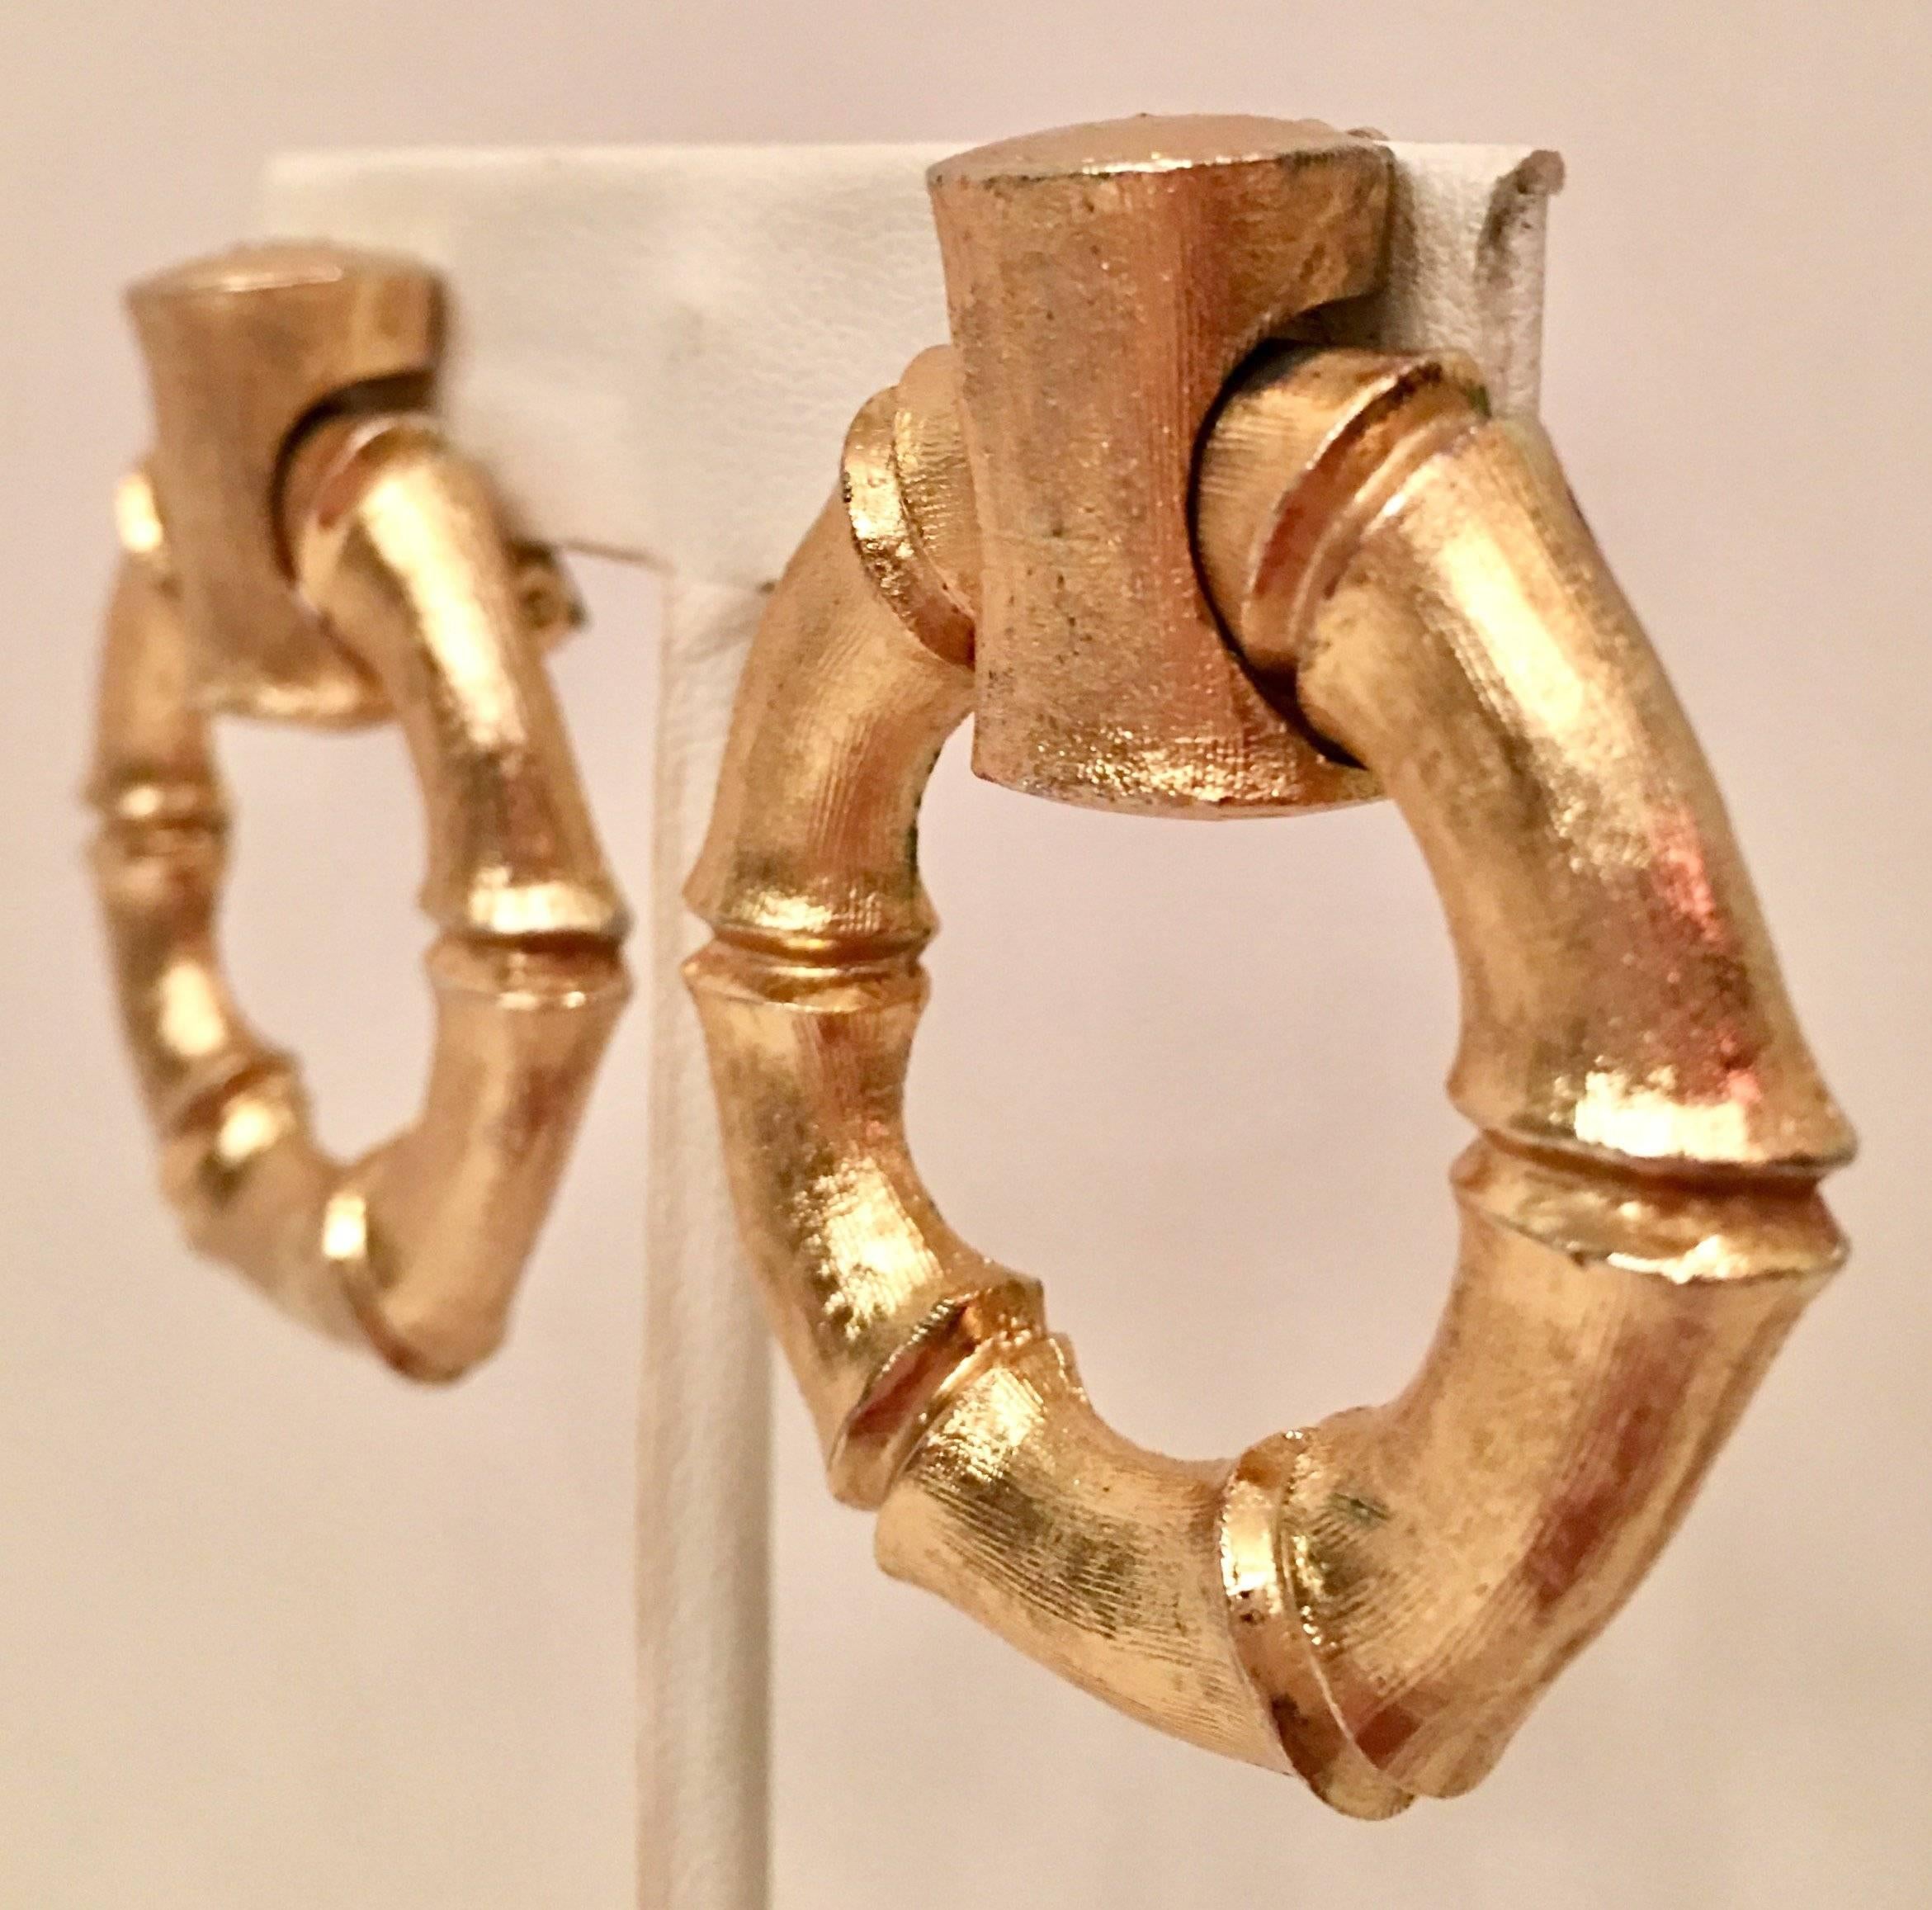 Vintage Napier brushed gold vermeil faux bamboo clip style hoop earrings. Signed on the underside, Napier.